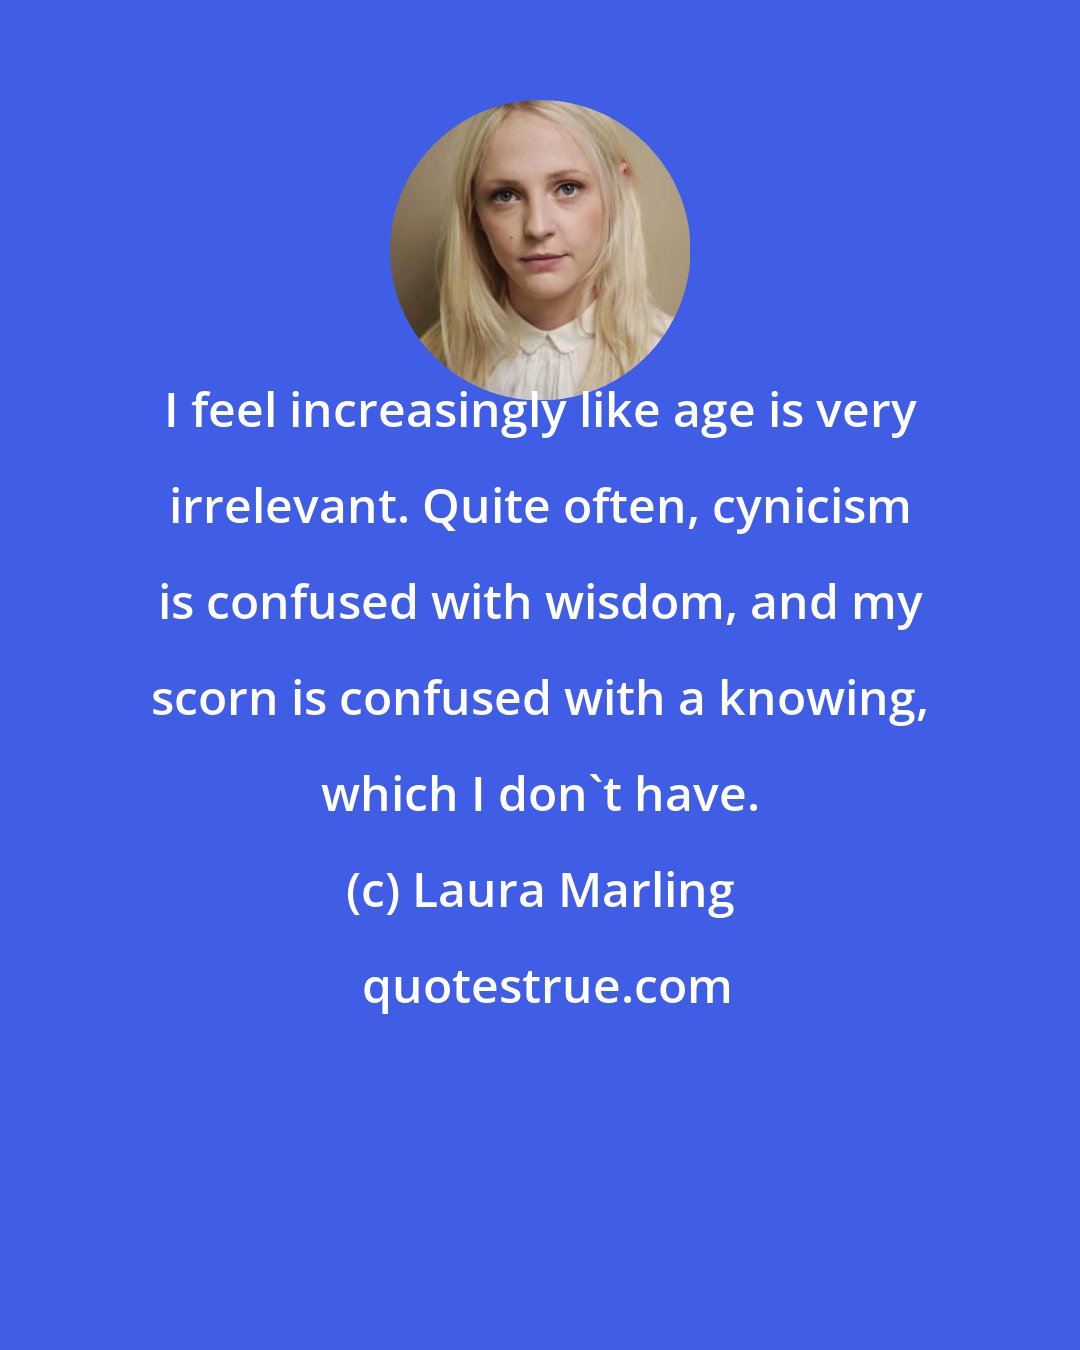 Laura Marling: I feel increasingly like age is very irrelevant. Quite often, cynicism is confused with wisdom, and my scorn is confused with a knowing, which I don't have.